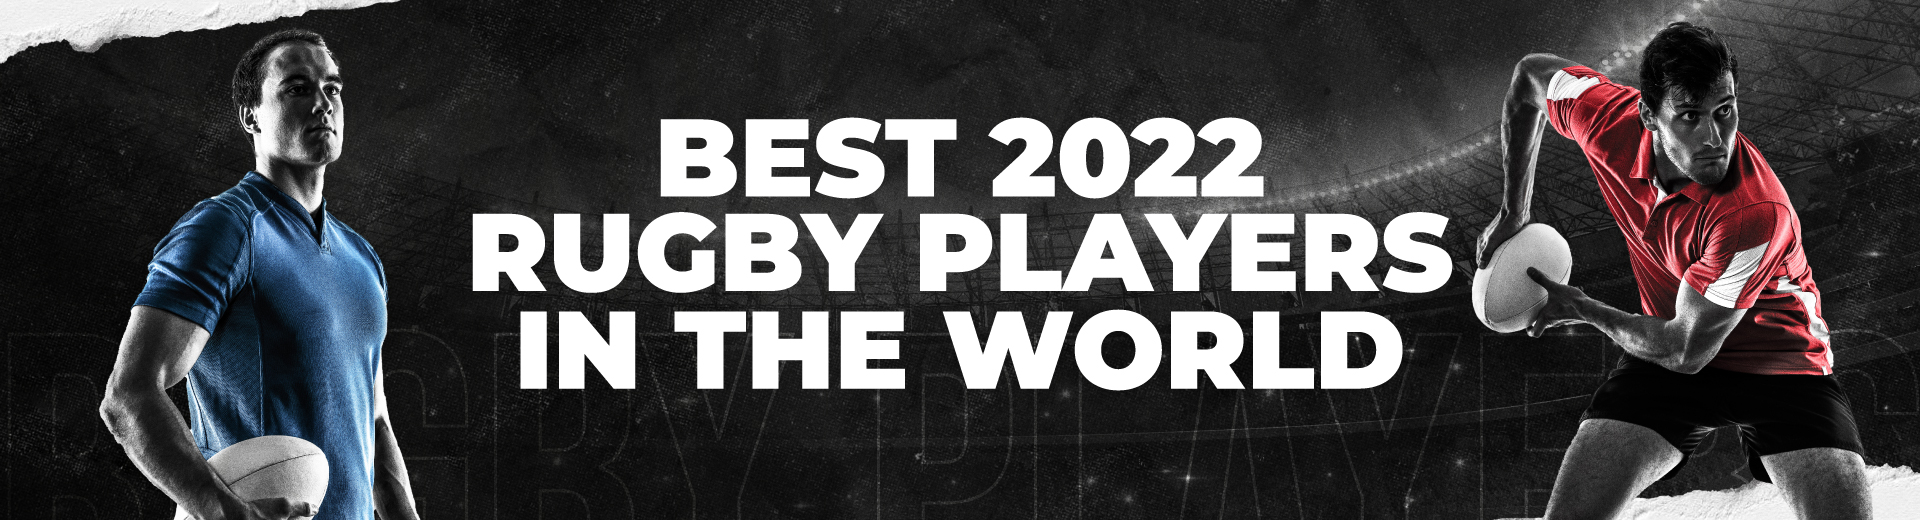 Top 10 Popular Rugby Players in the World in 2022 - OKBET sports betting